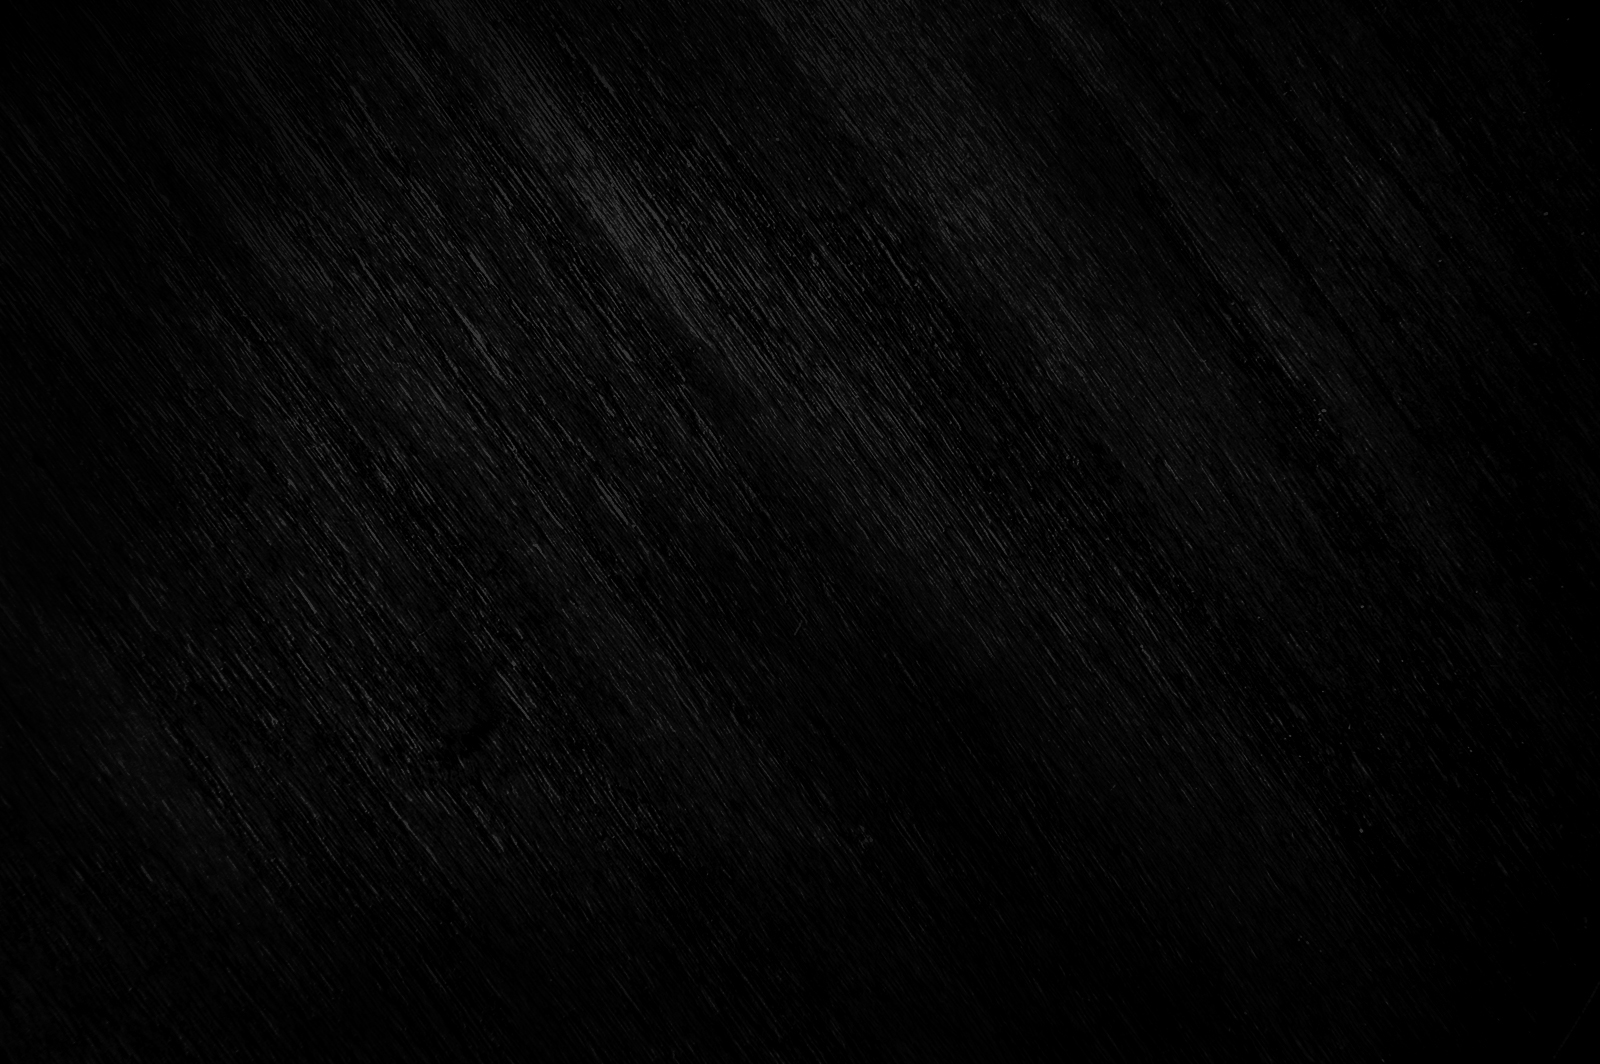 Free Download For Dark Textured Wallpapers Black Background And Some Ppt Template 1600x1064 For Your Desktop Mobile Tablet Explore 48 Textured Black Wallpaper Textured Wallpaper Designs Textured Paintable Wallpaper